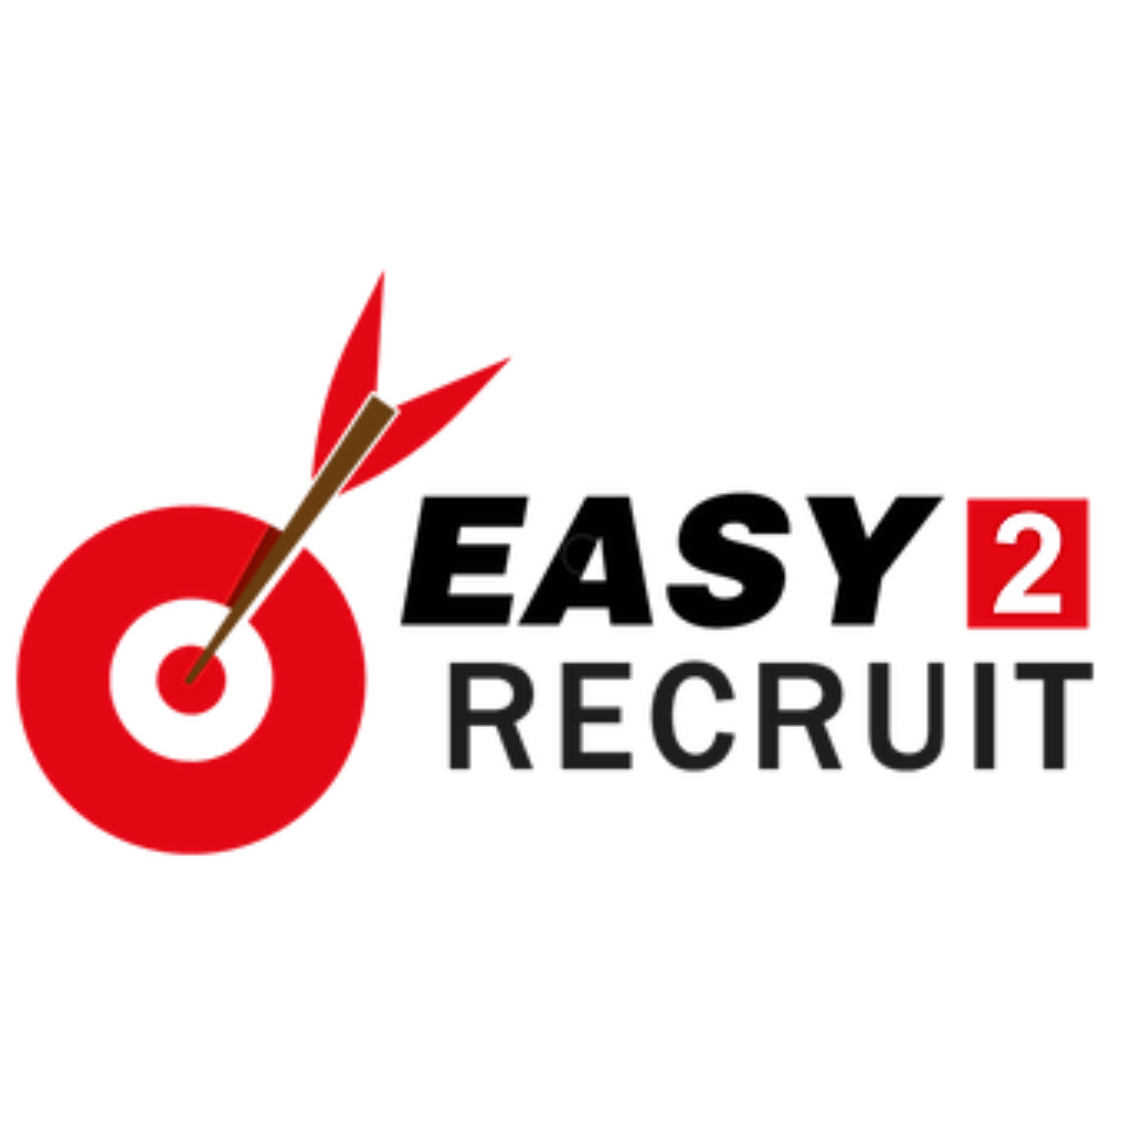 Easy2Recruit offers support to NBRA members